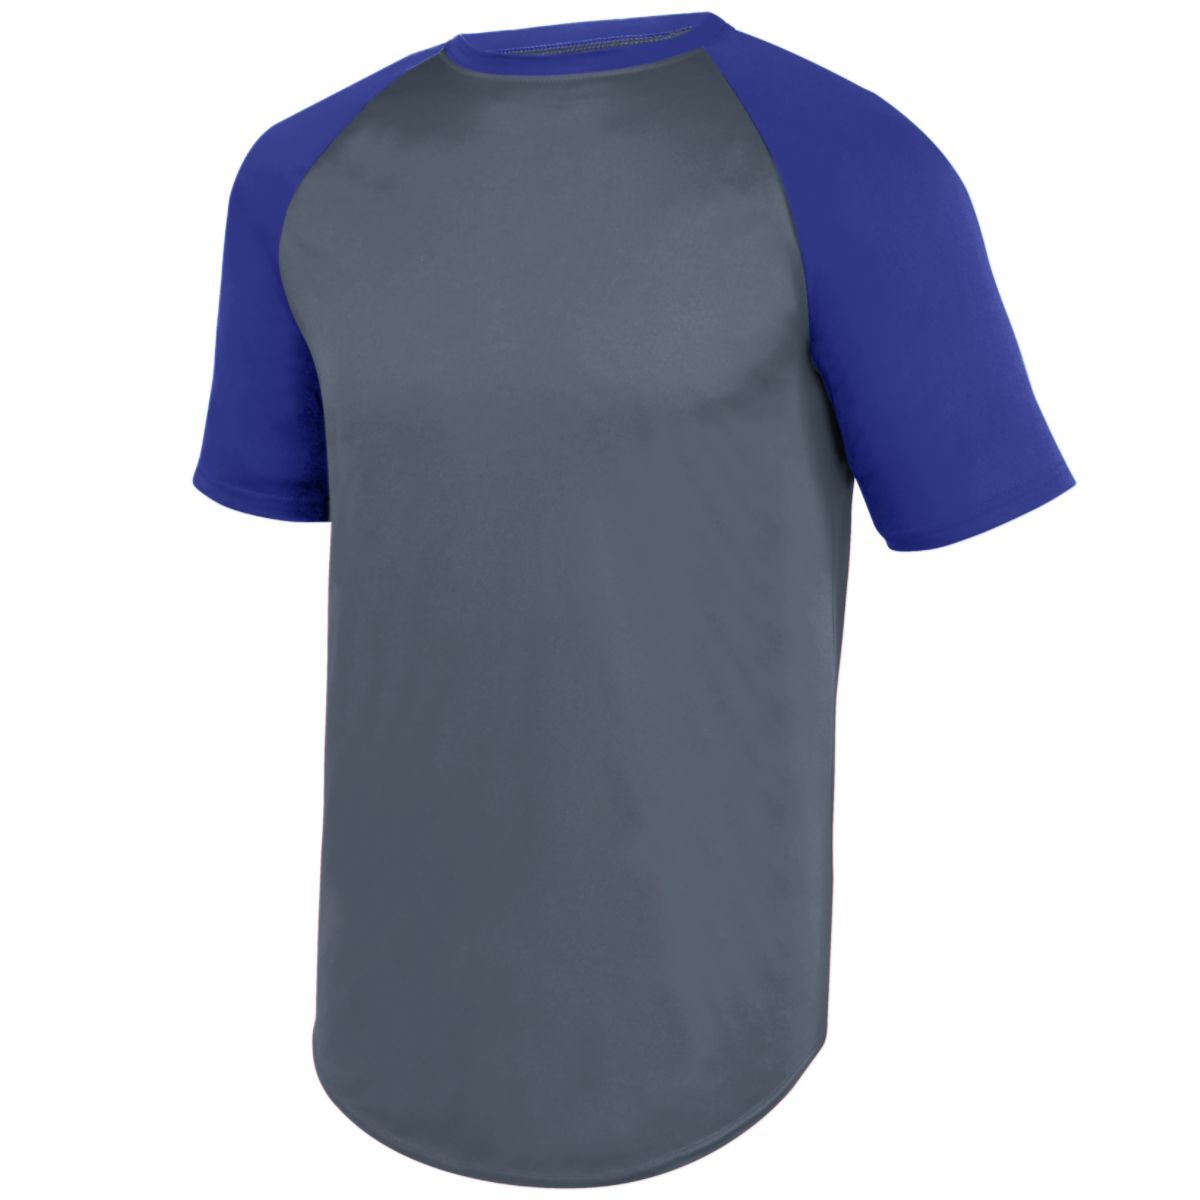 Augusta Sportswear Wicking Short Sleeve Baseball Jersey in Graphite/Purple  -Part of the Adult, Adult-Jersey, Augusta-Products, Baseball, Shirts, All-Sports, All-Sports-1 product lines at KanaleyCreations.com